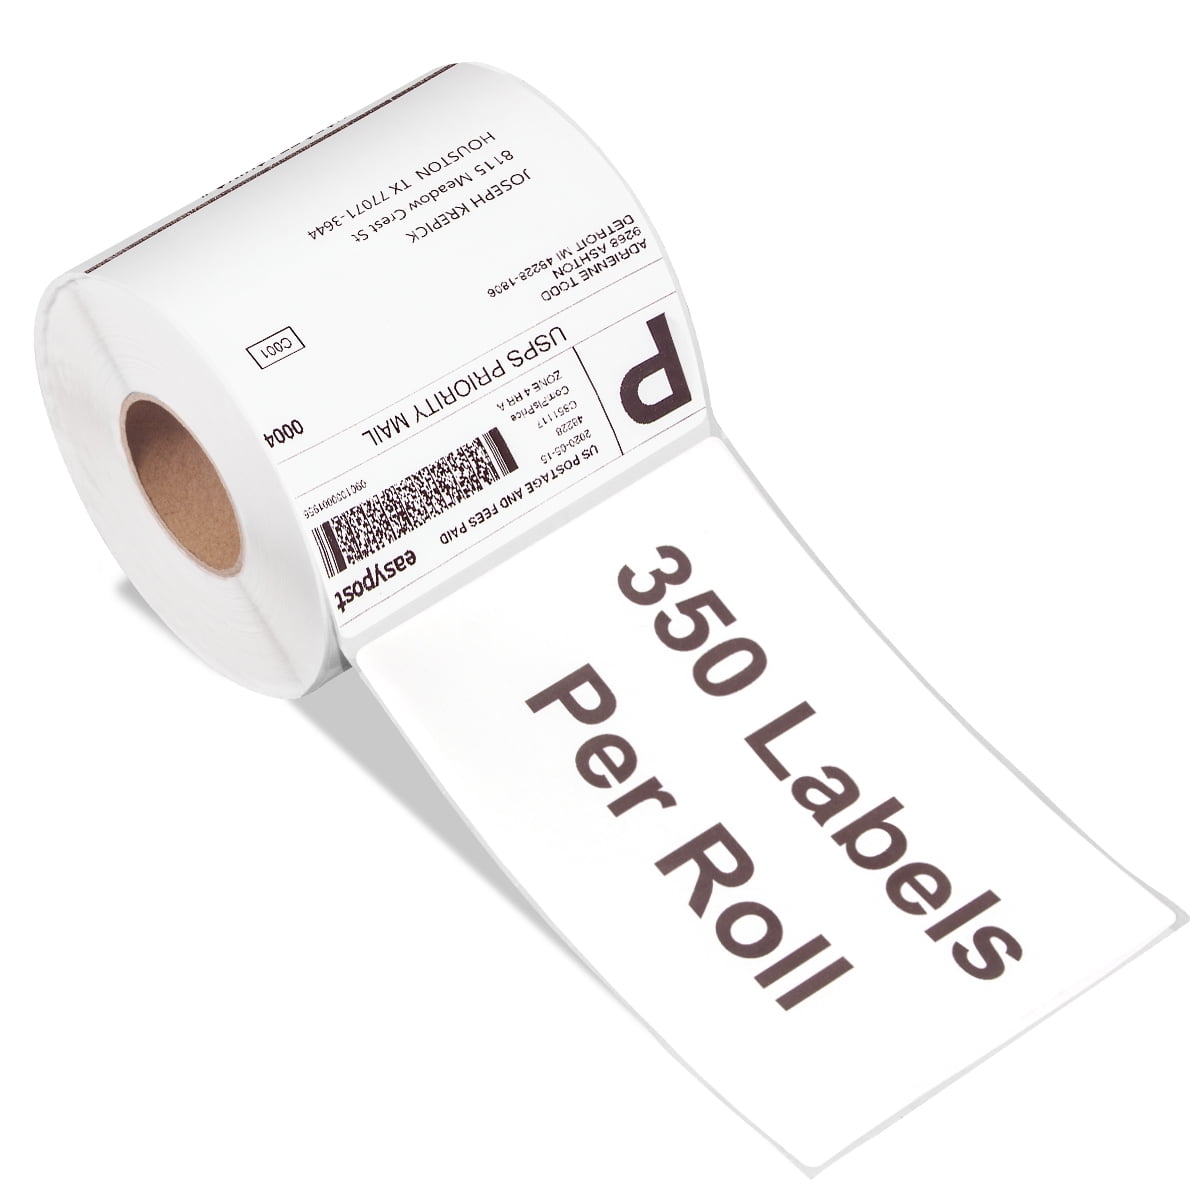 500 4" x 6" Fanfold Direct Thermal Shipping Labels for Zebra and Rollo Printers 